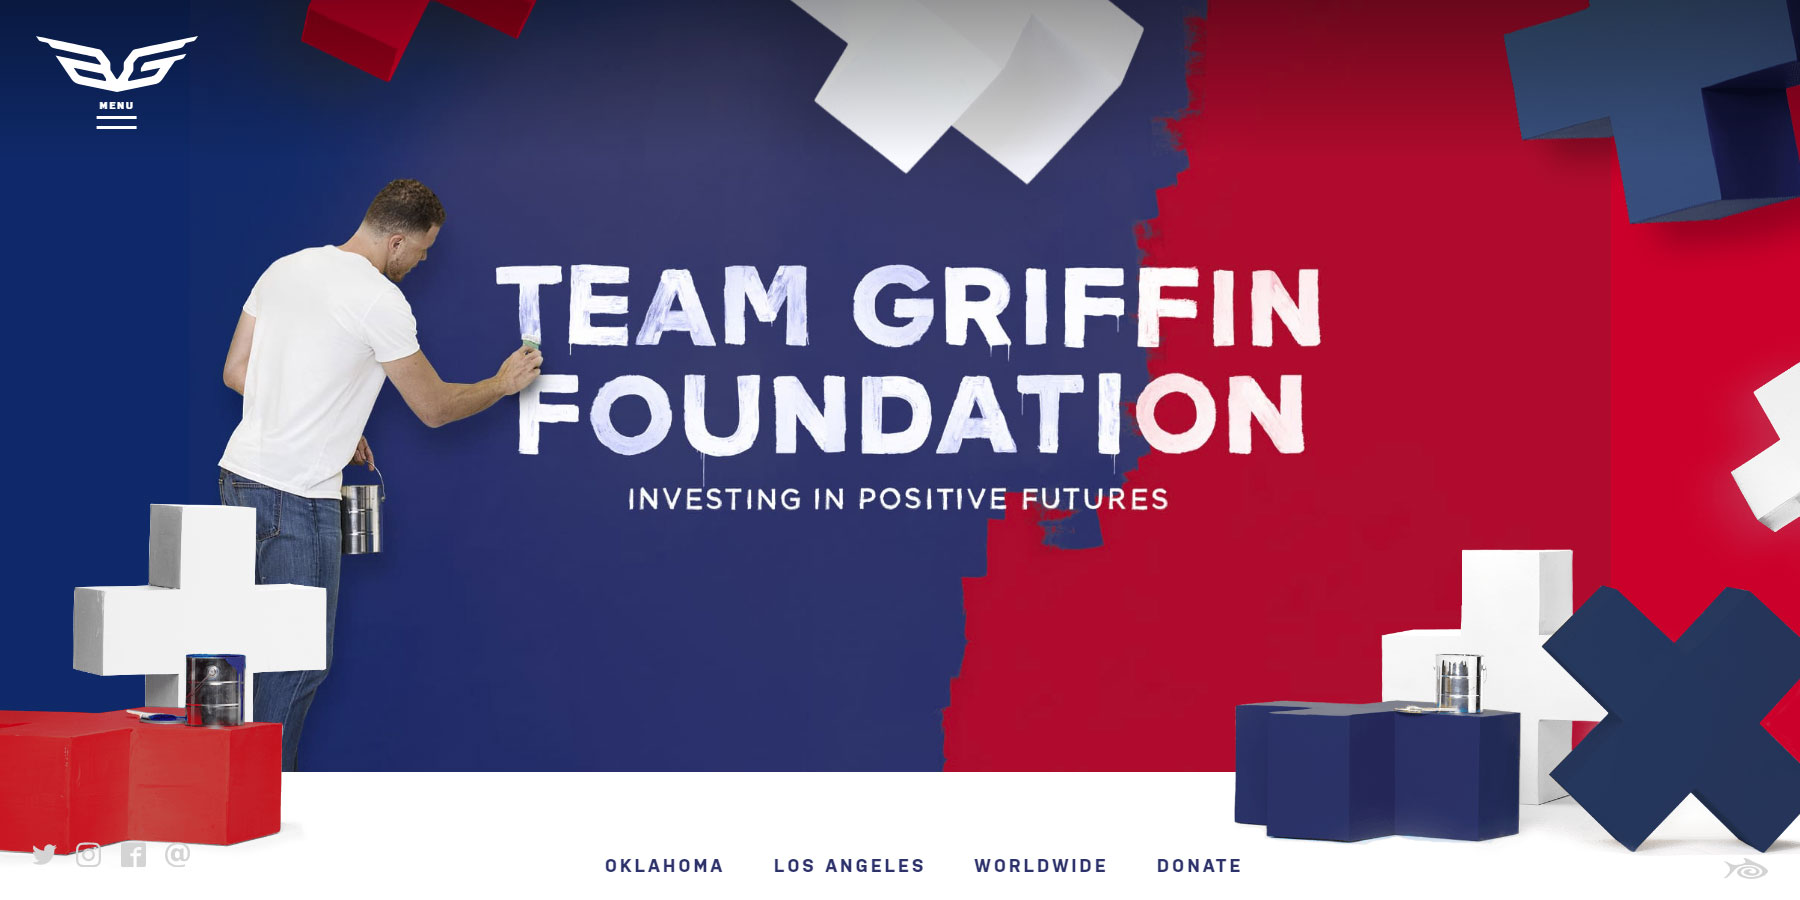 Blake Griffin - Website of the Day